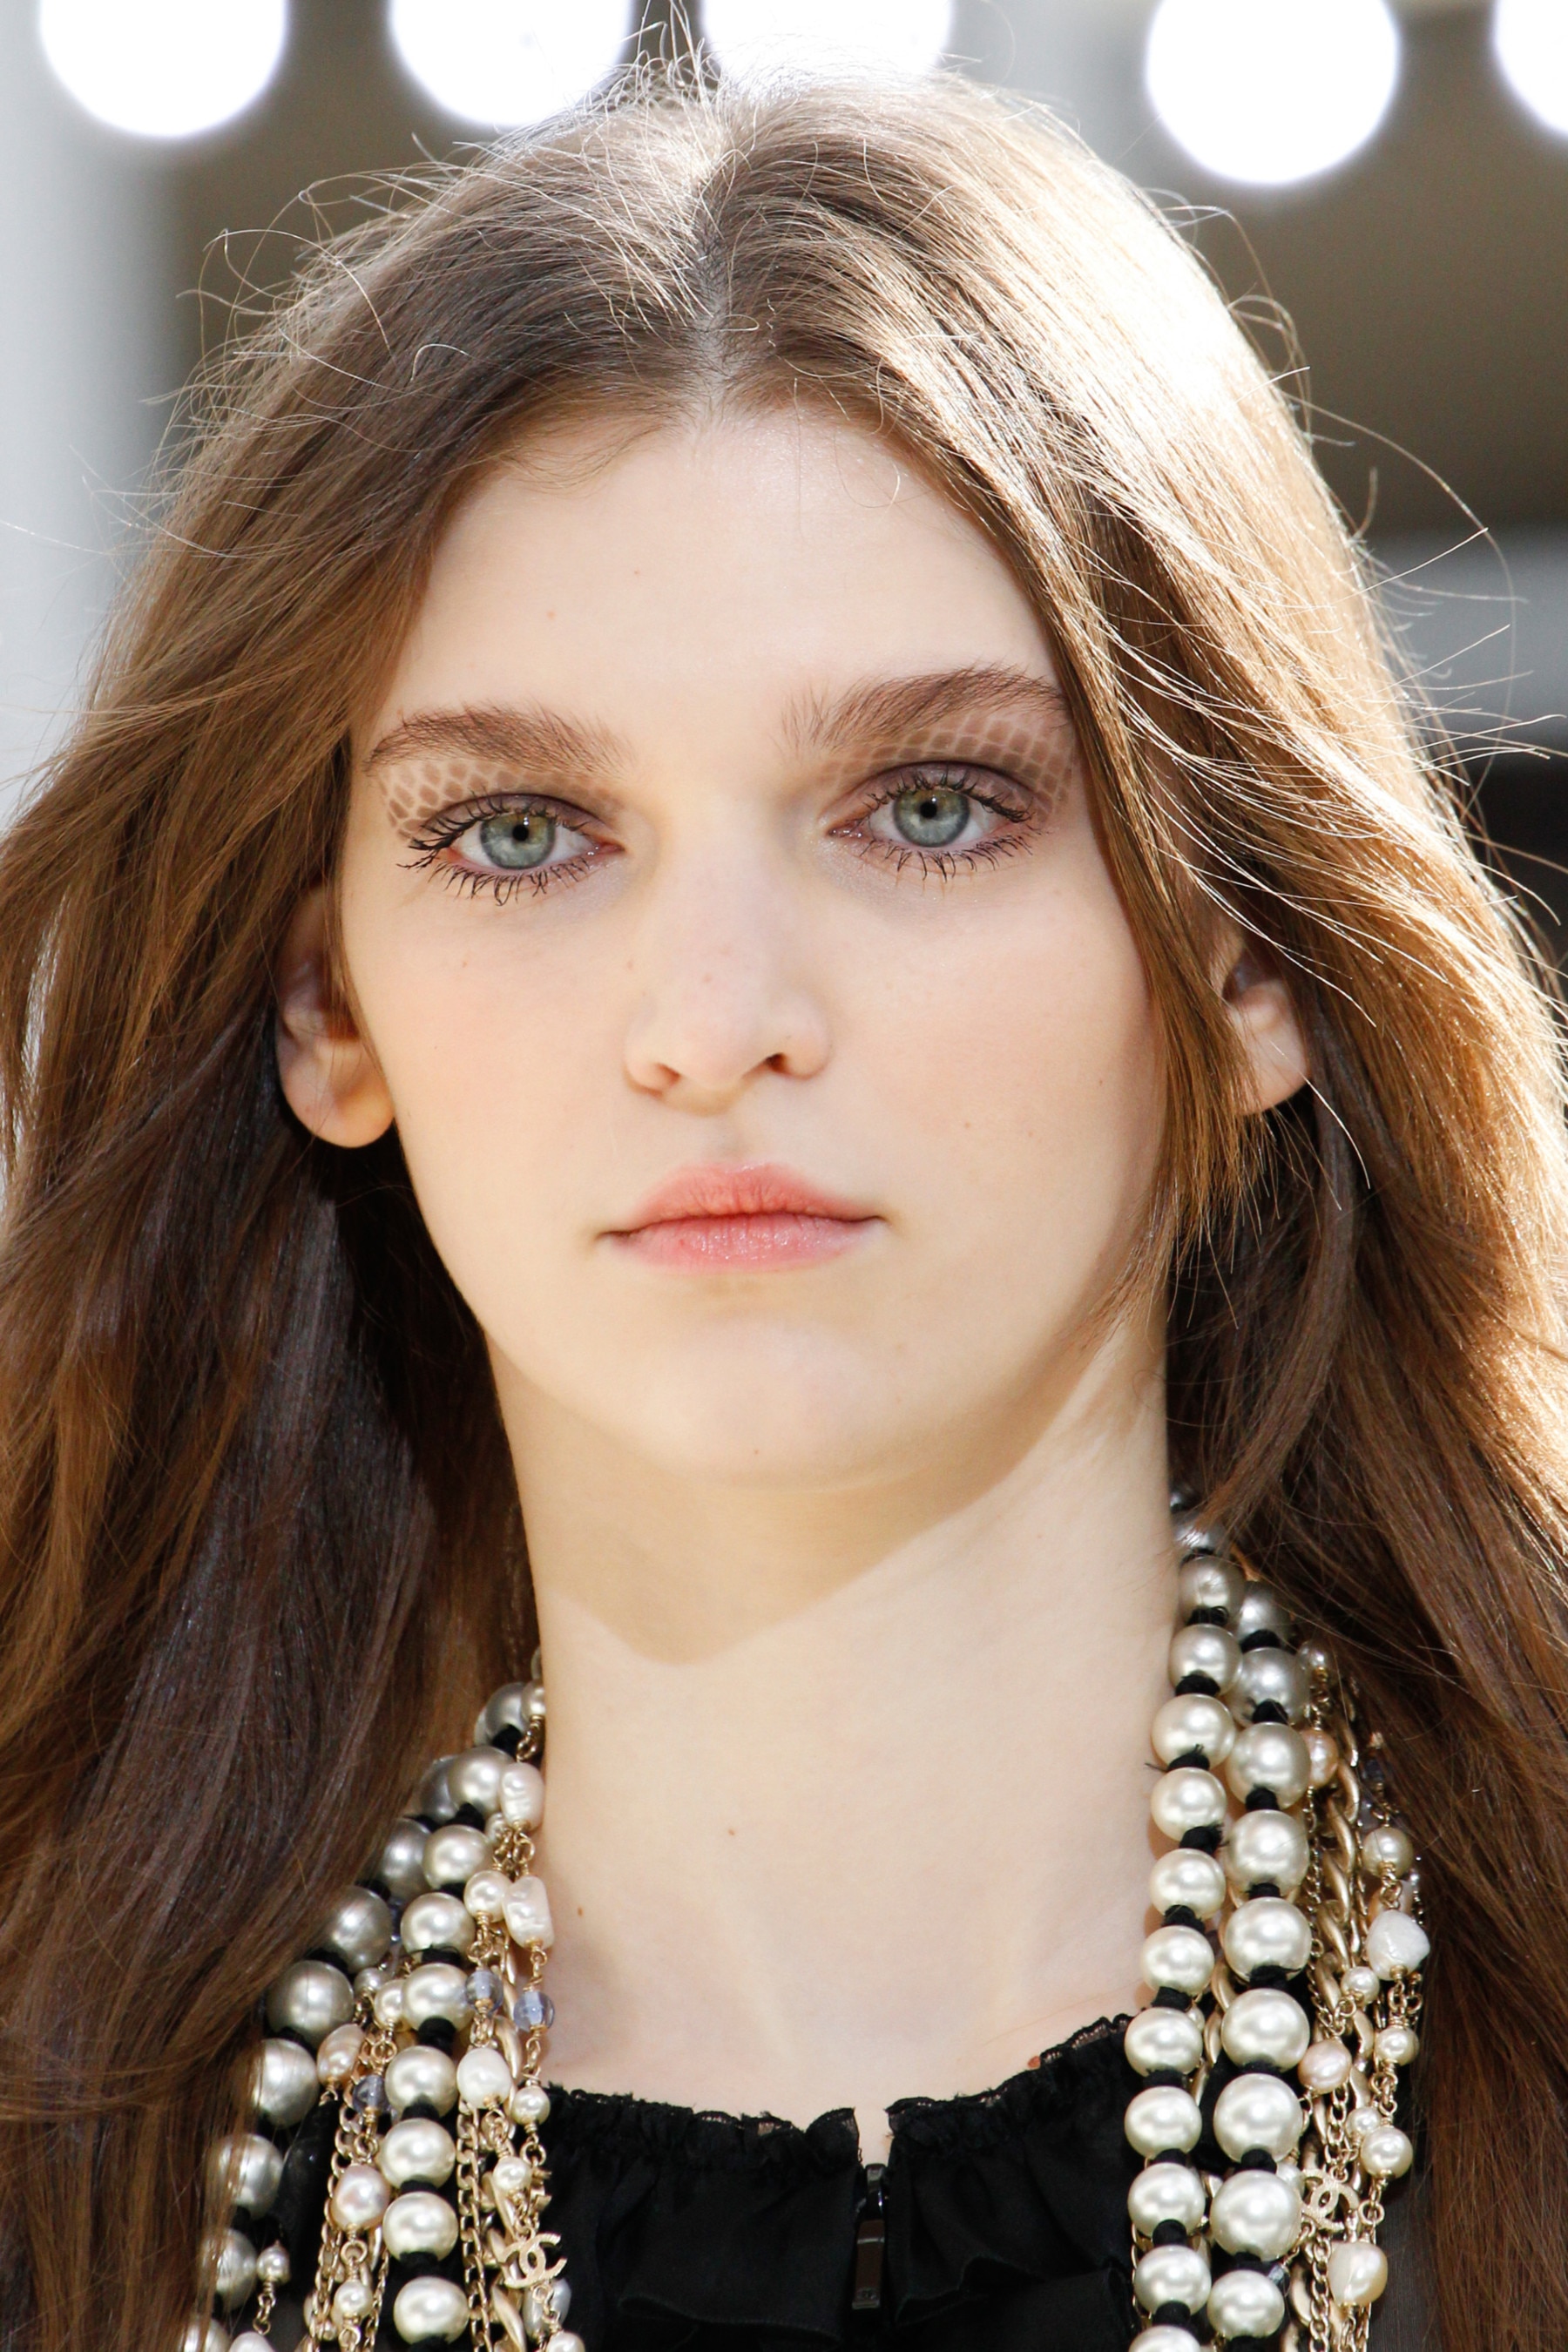 The make-up from Chanel's show gives new meaning to the phrase